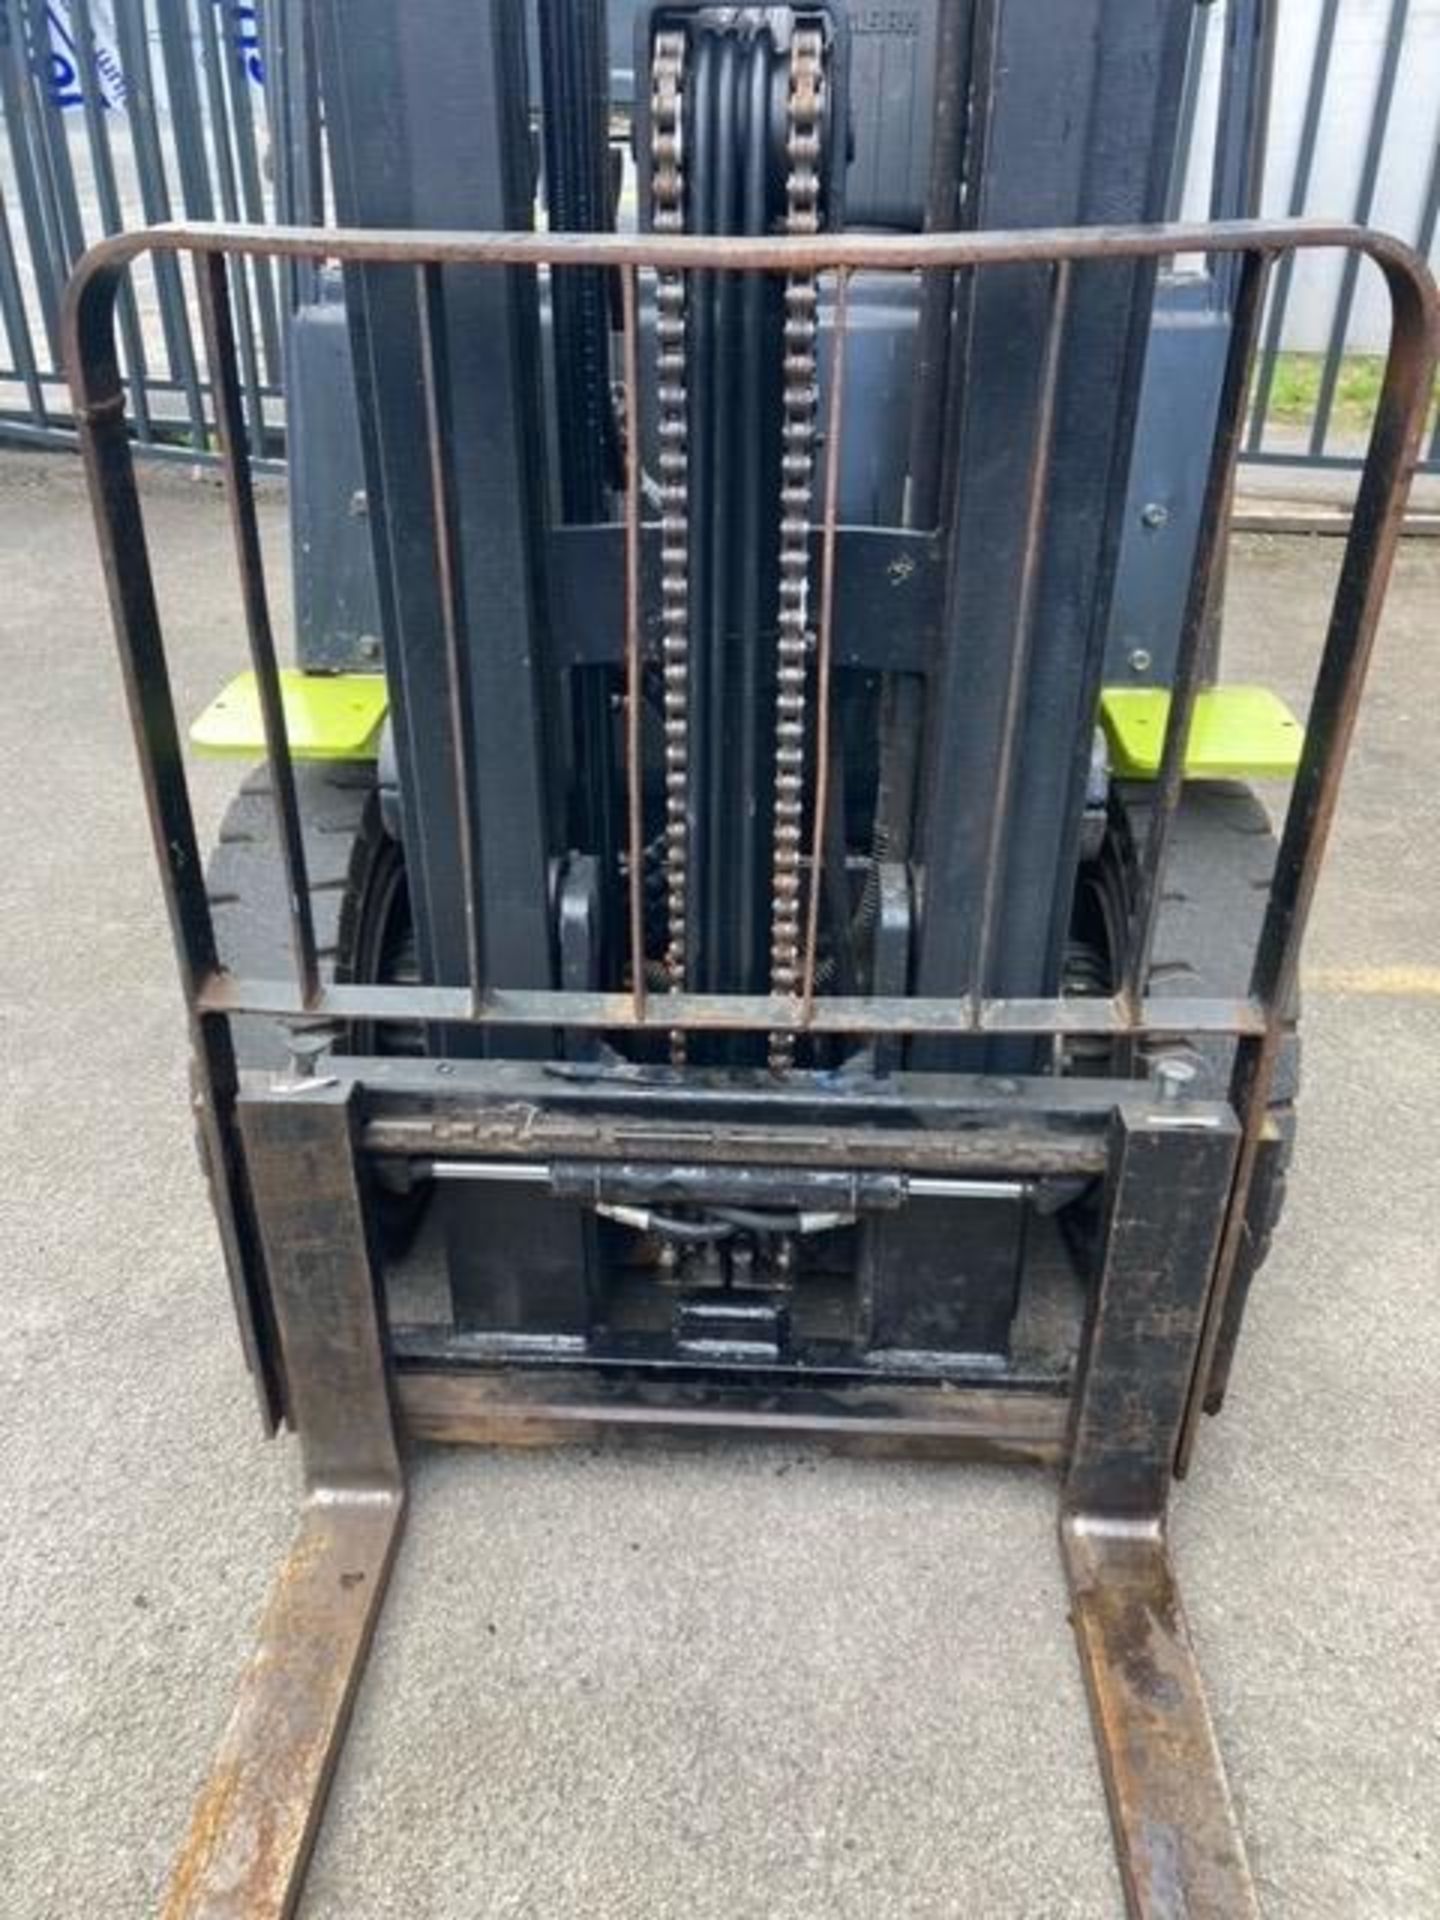 Clark GTS325D diesel Forklift Truck, year 2018, 25 - Image 8 of 23